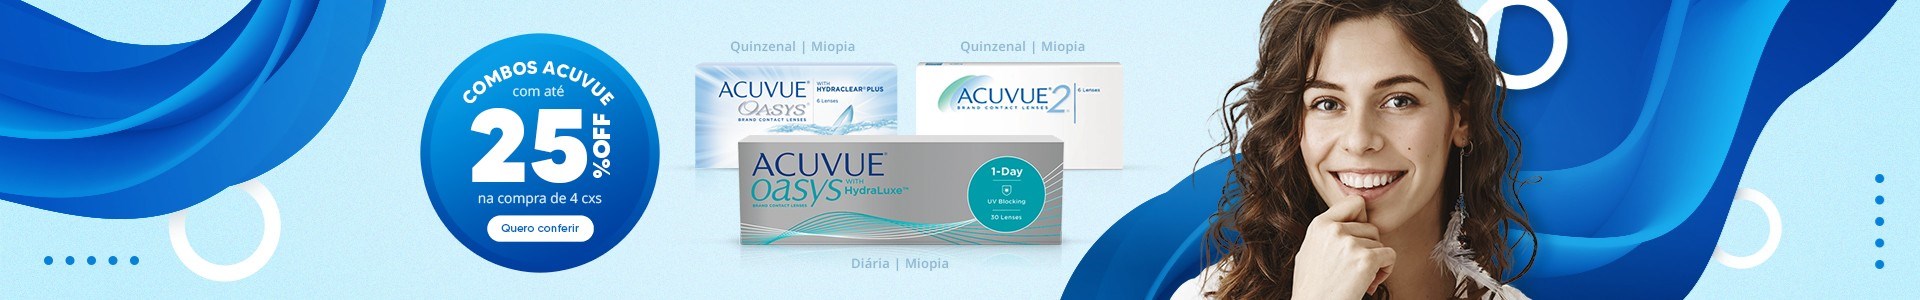 Acuvue Combos